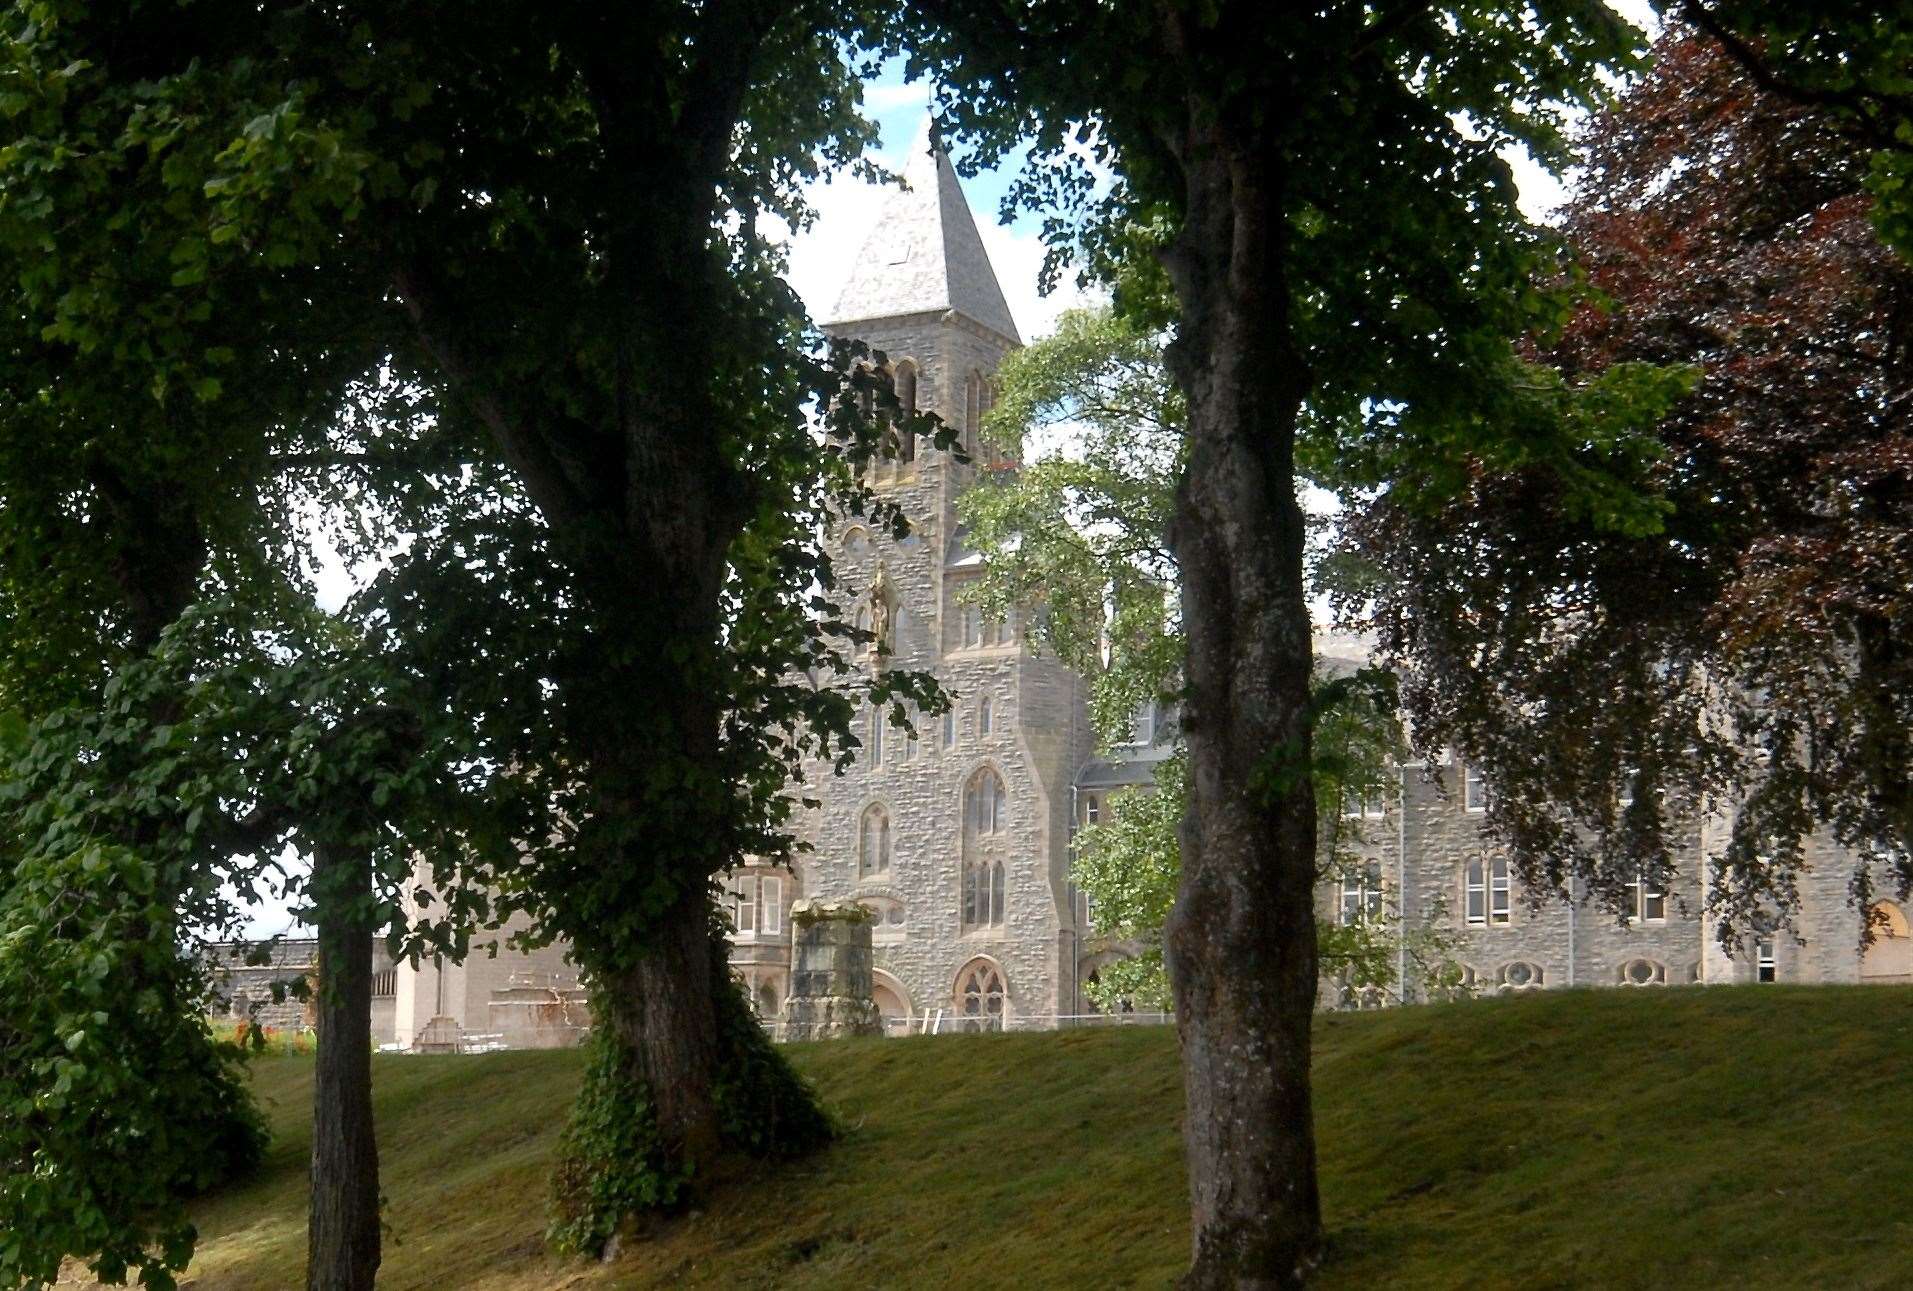 The offences were committed at the former Fort Augustus Abbey school in the 1970s.